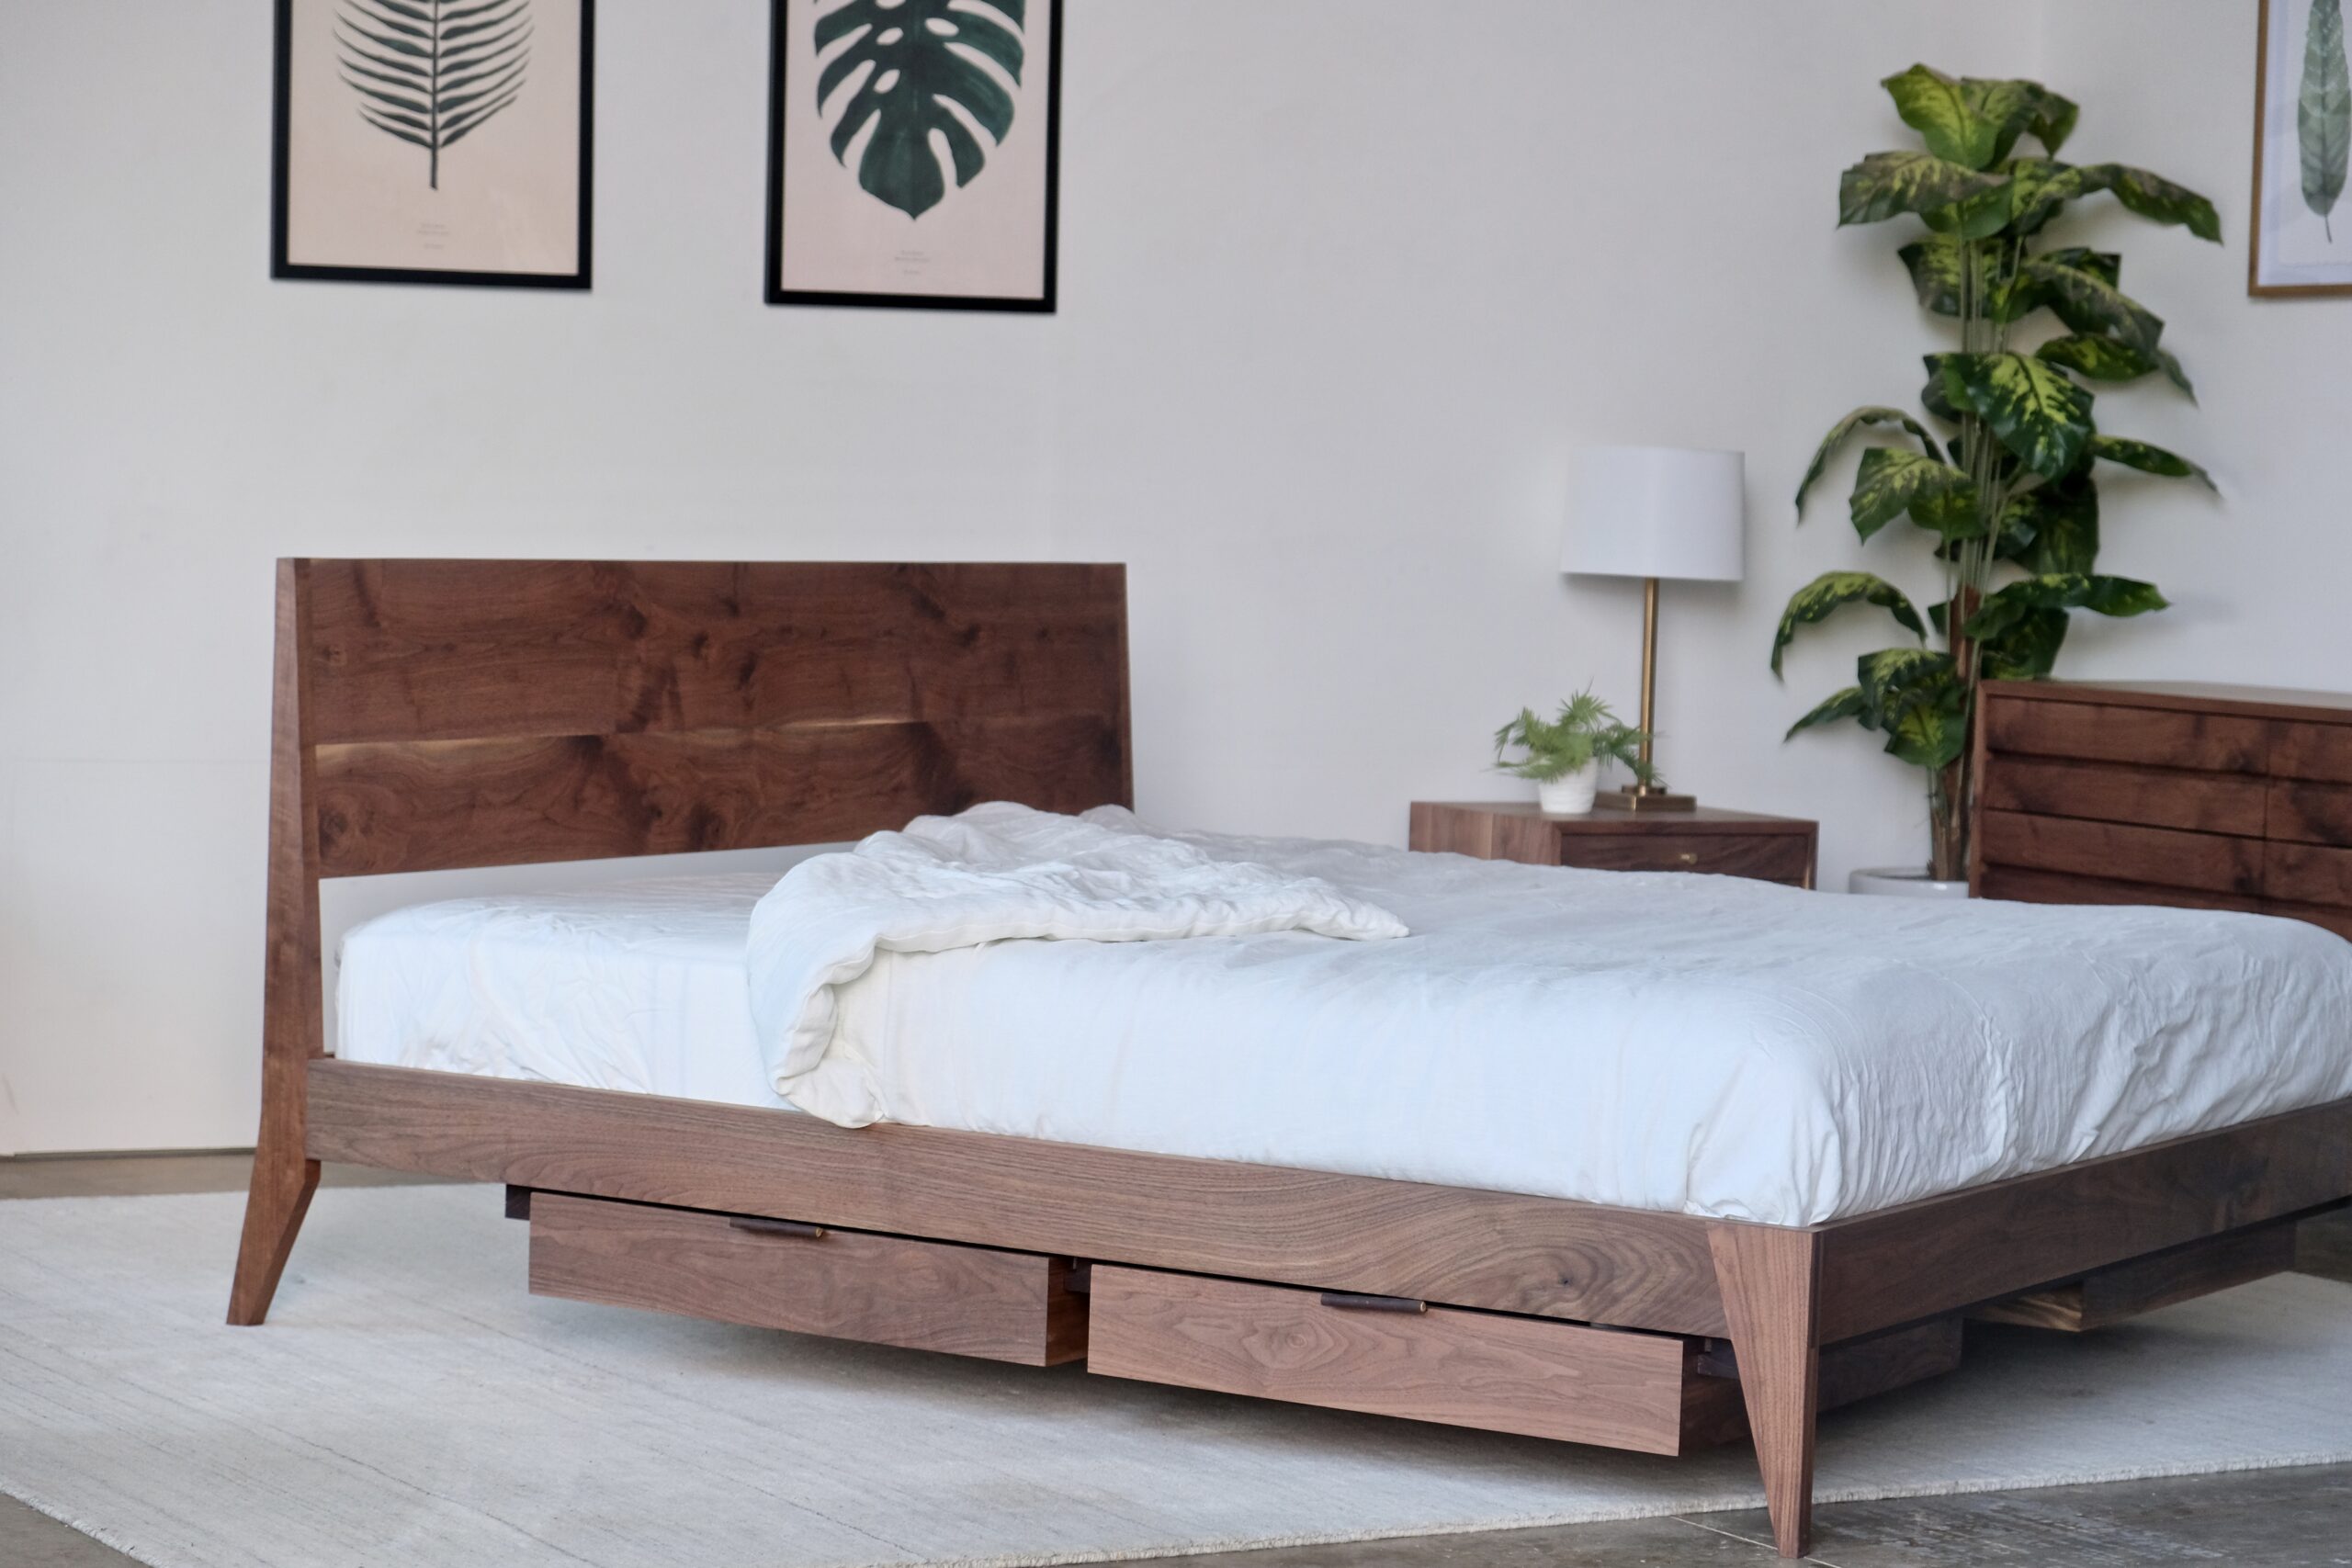 A walnut bed with drawers suspended underneath.